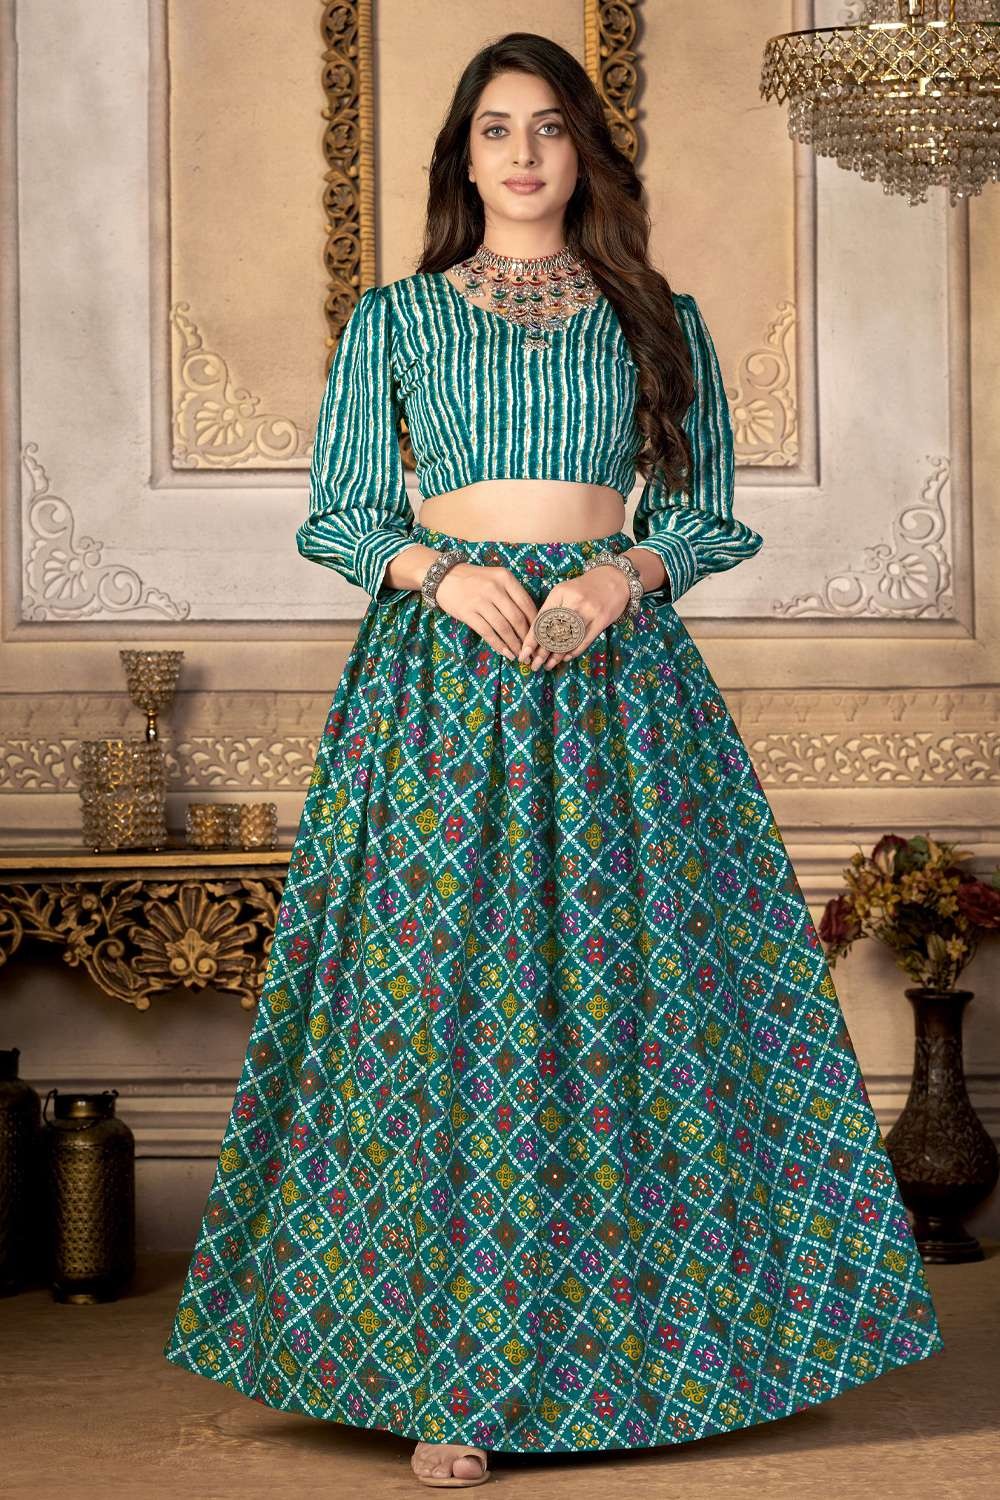 Photo of Indo-western blouse and skirt